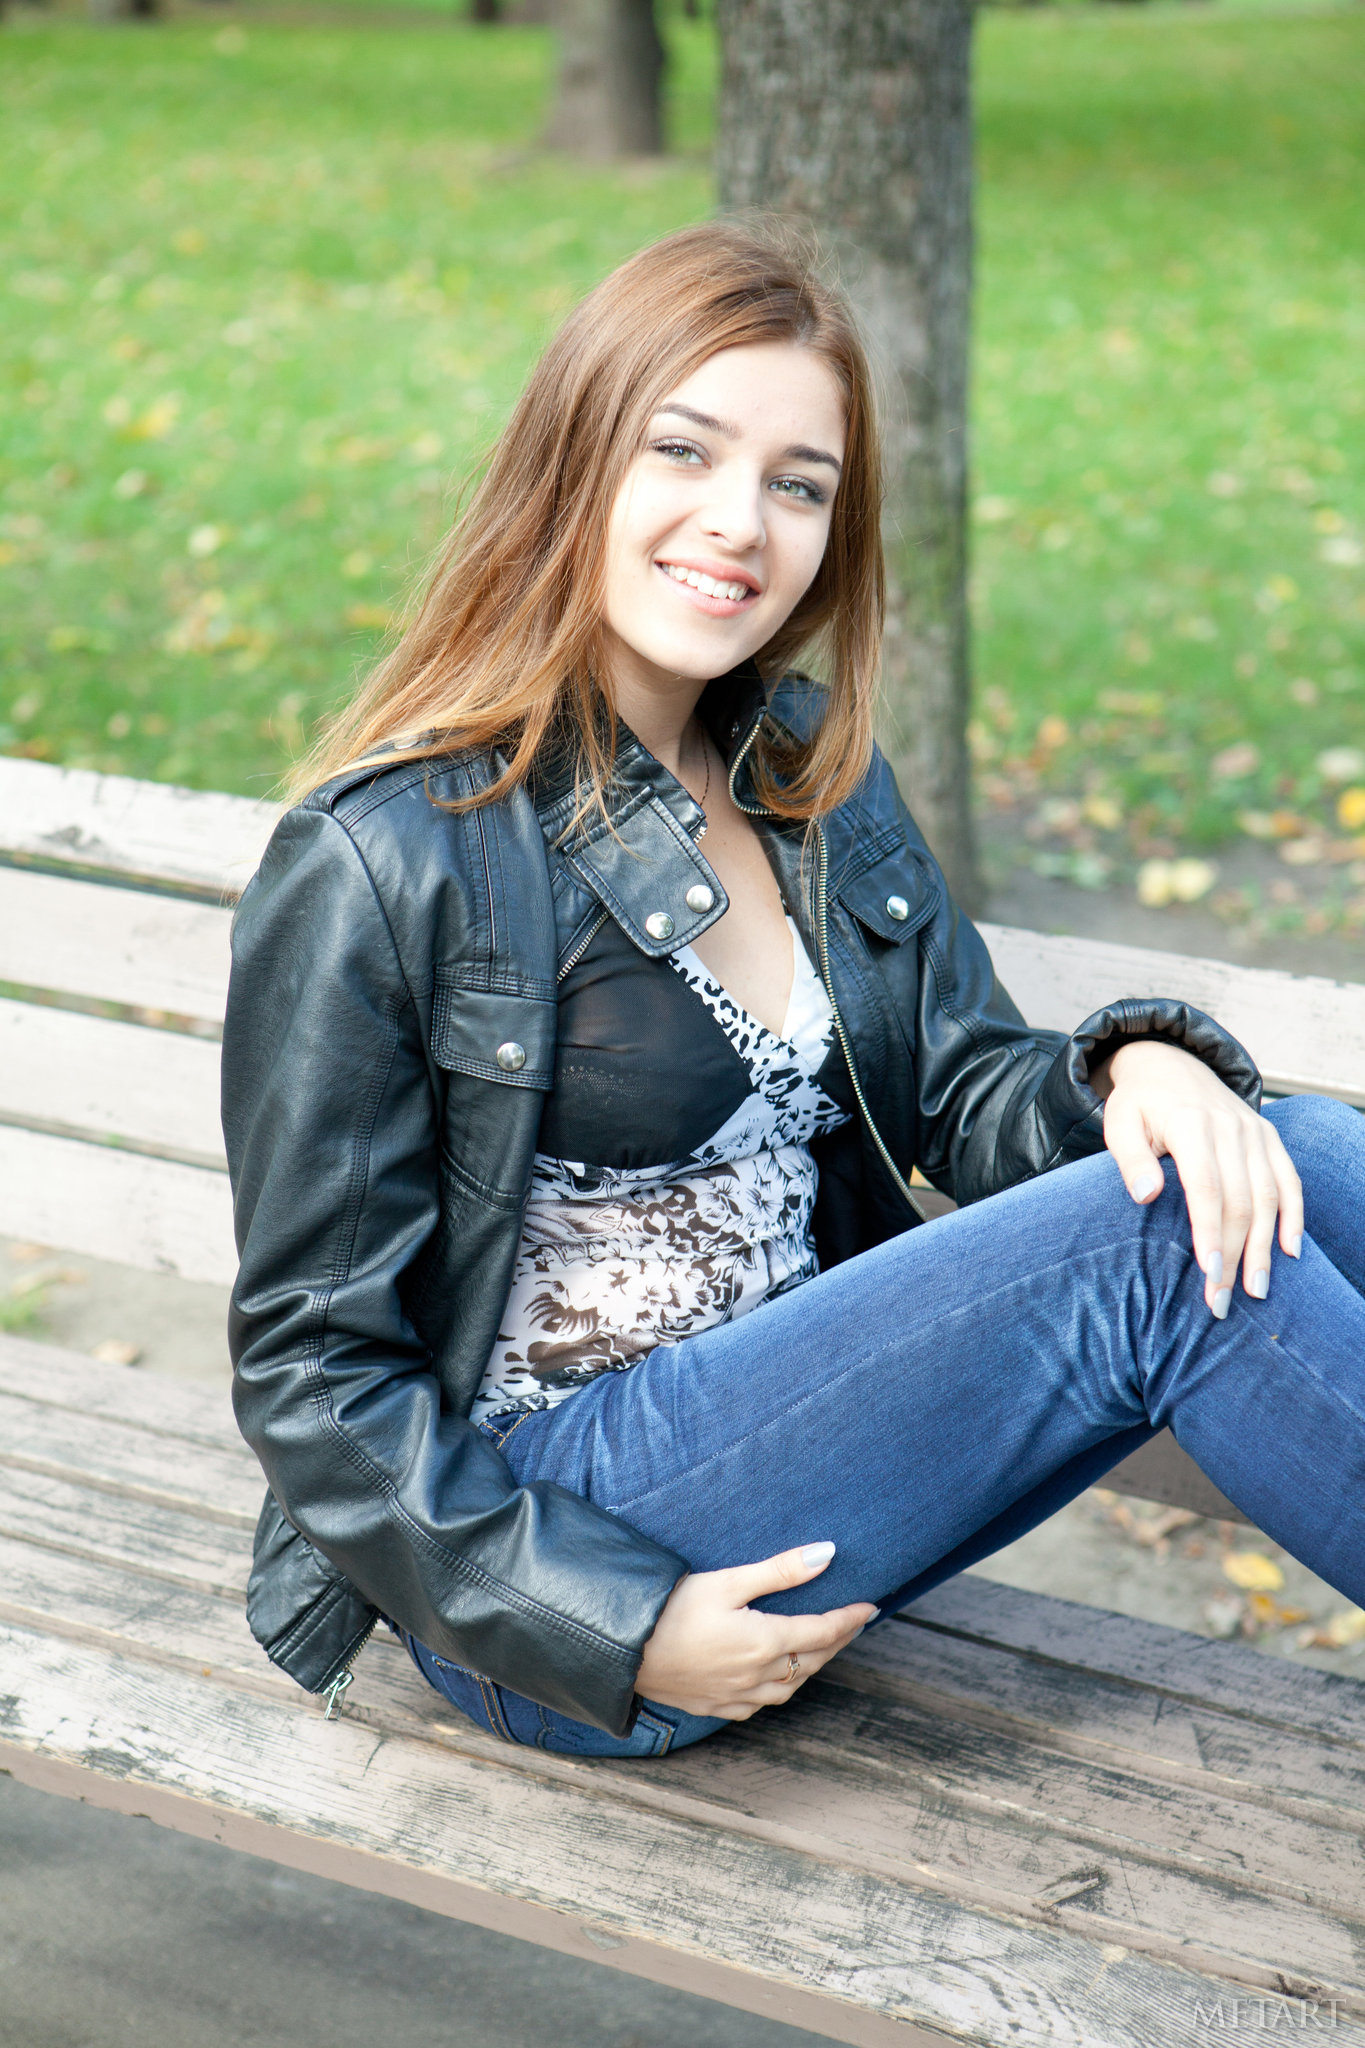 Model Women Outdoors Looking At Viewer Leather Jackets Bench Sitting Brunette Smiling Long Hair Blac 1365x2048